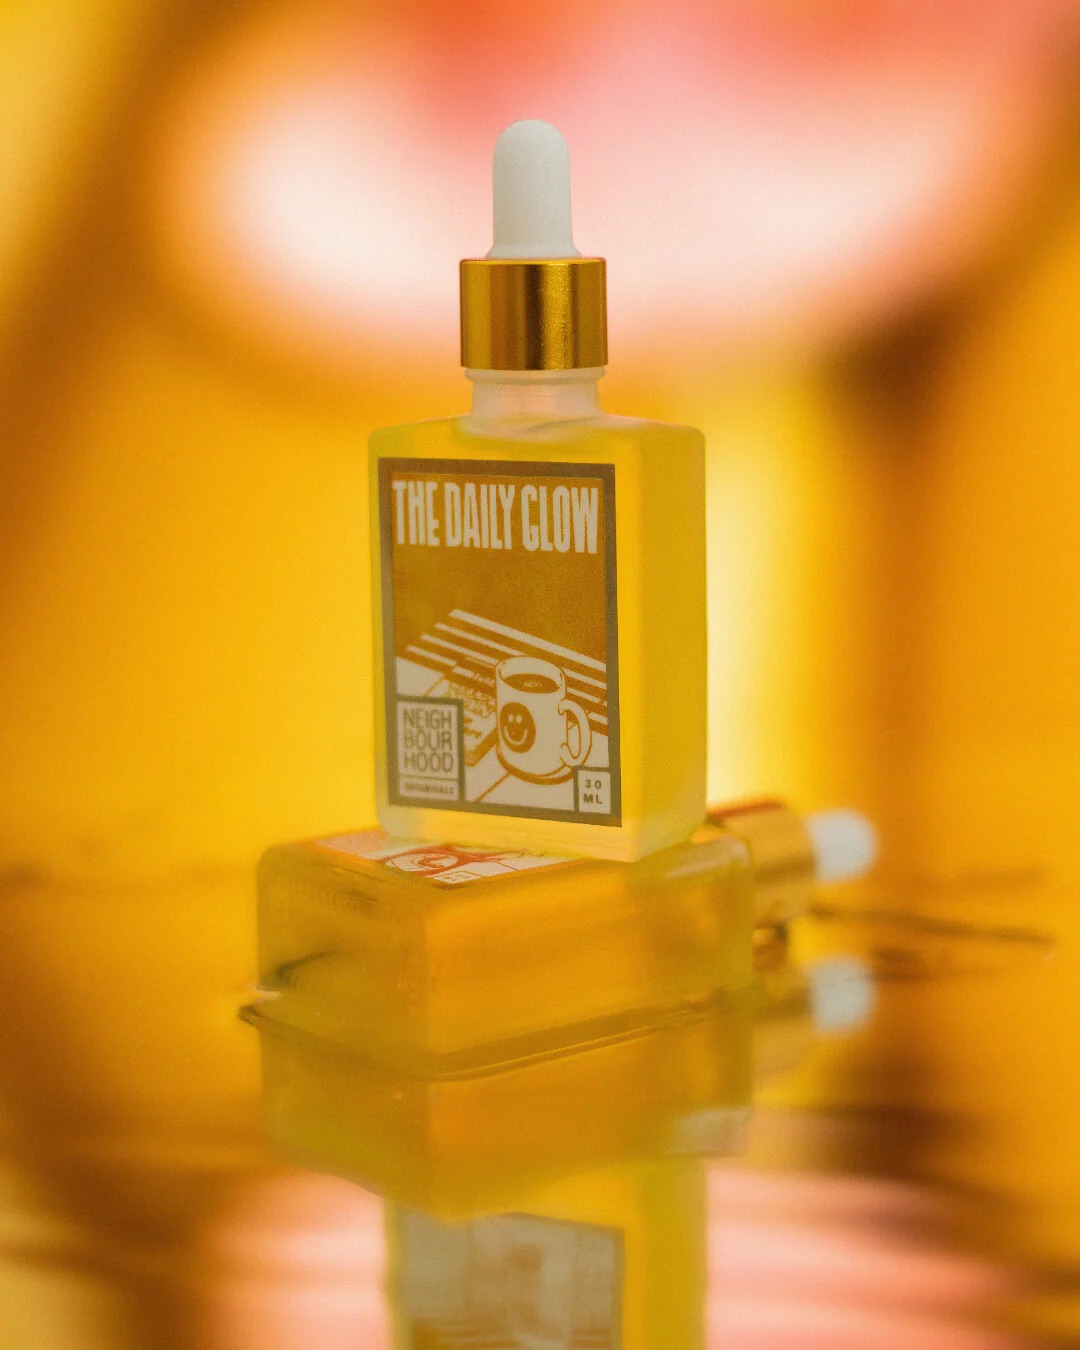 The Daily Glow Facial Oil by Neighbourhood